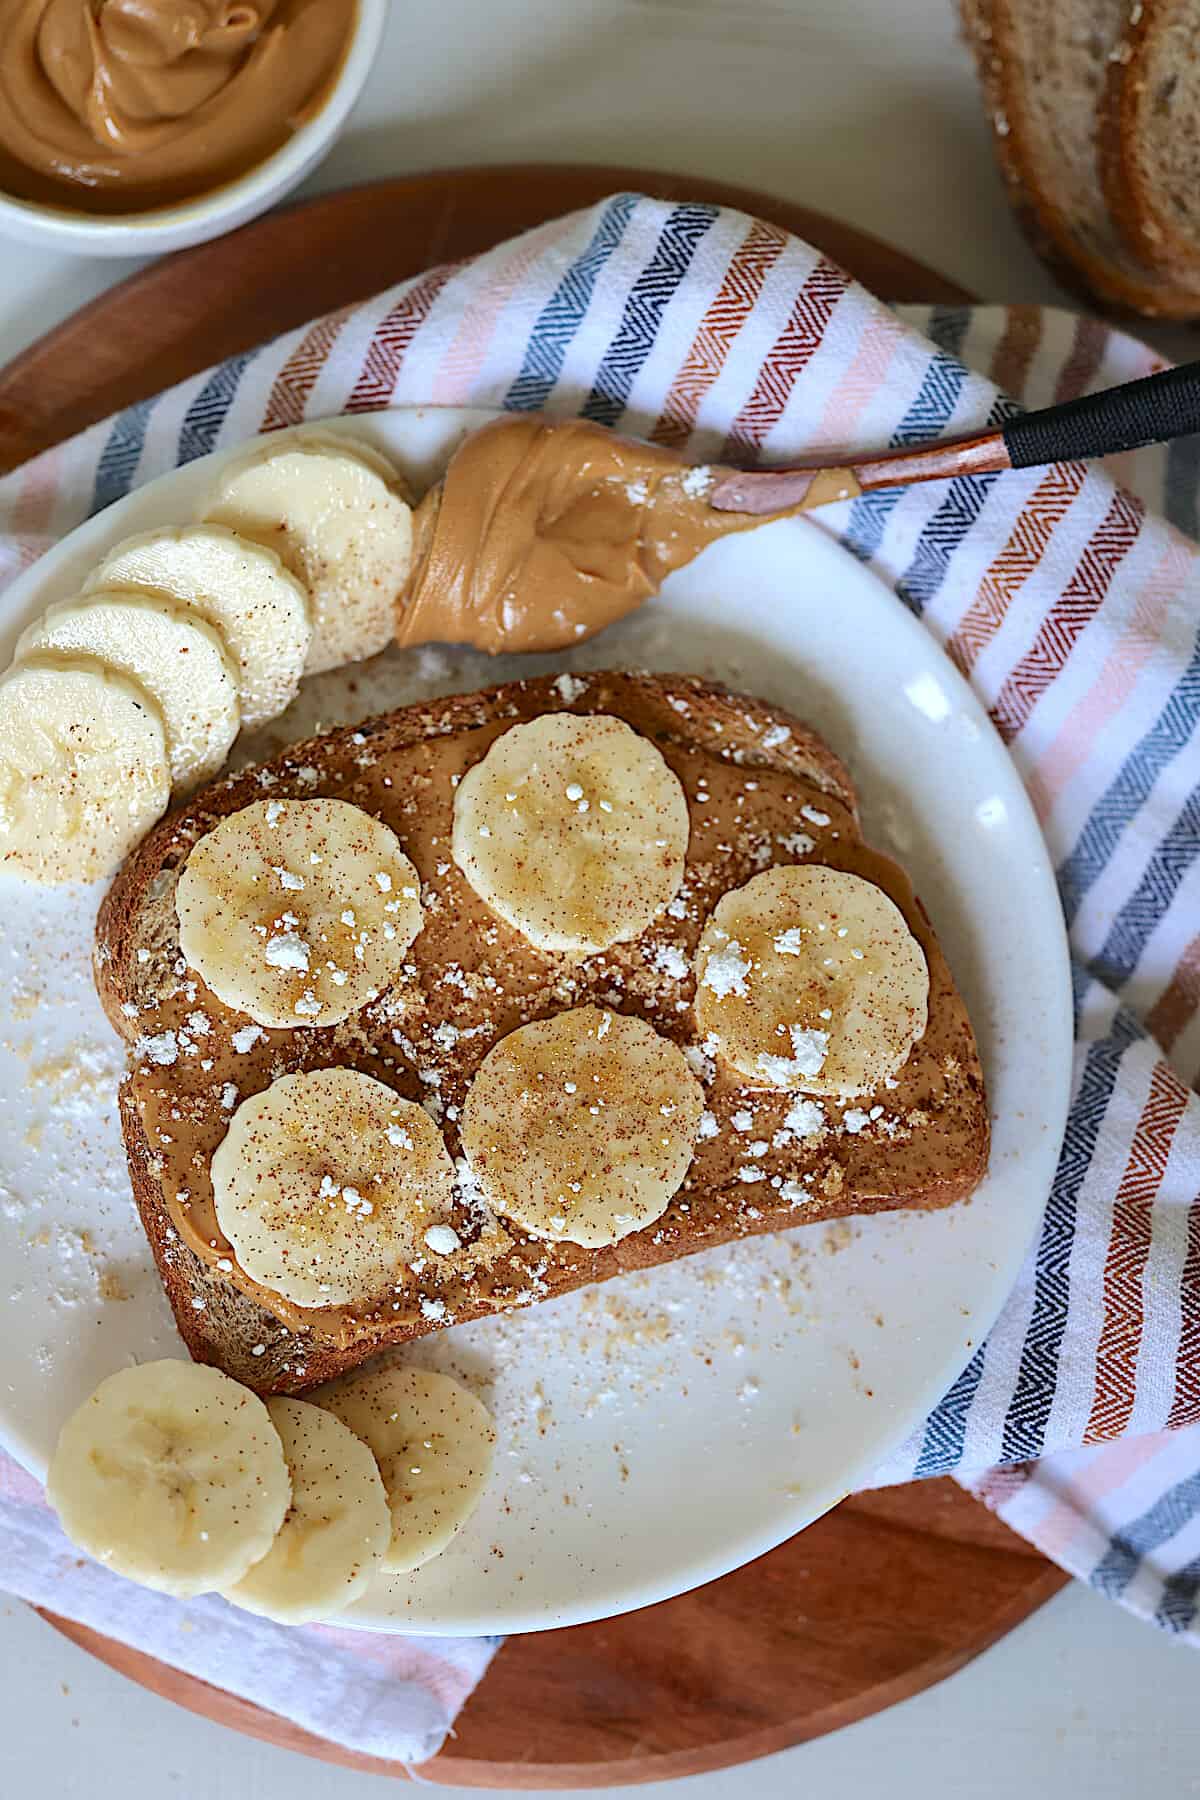 peanut butter banana toast on a white plate sprinkled with brown sugar and cinnamon